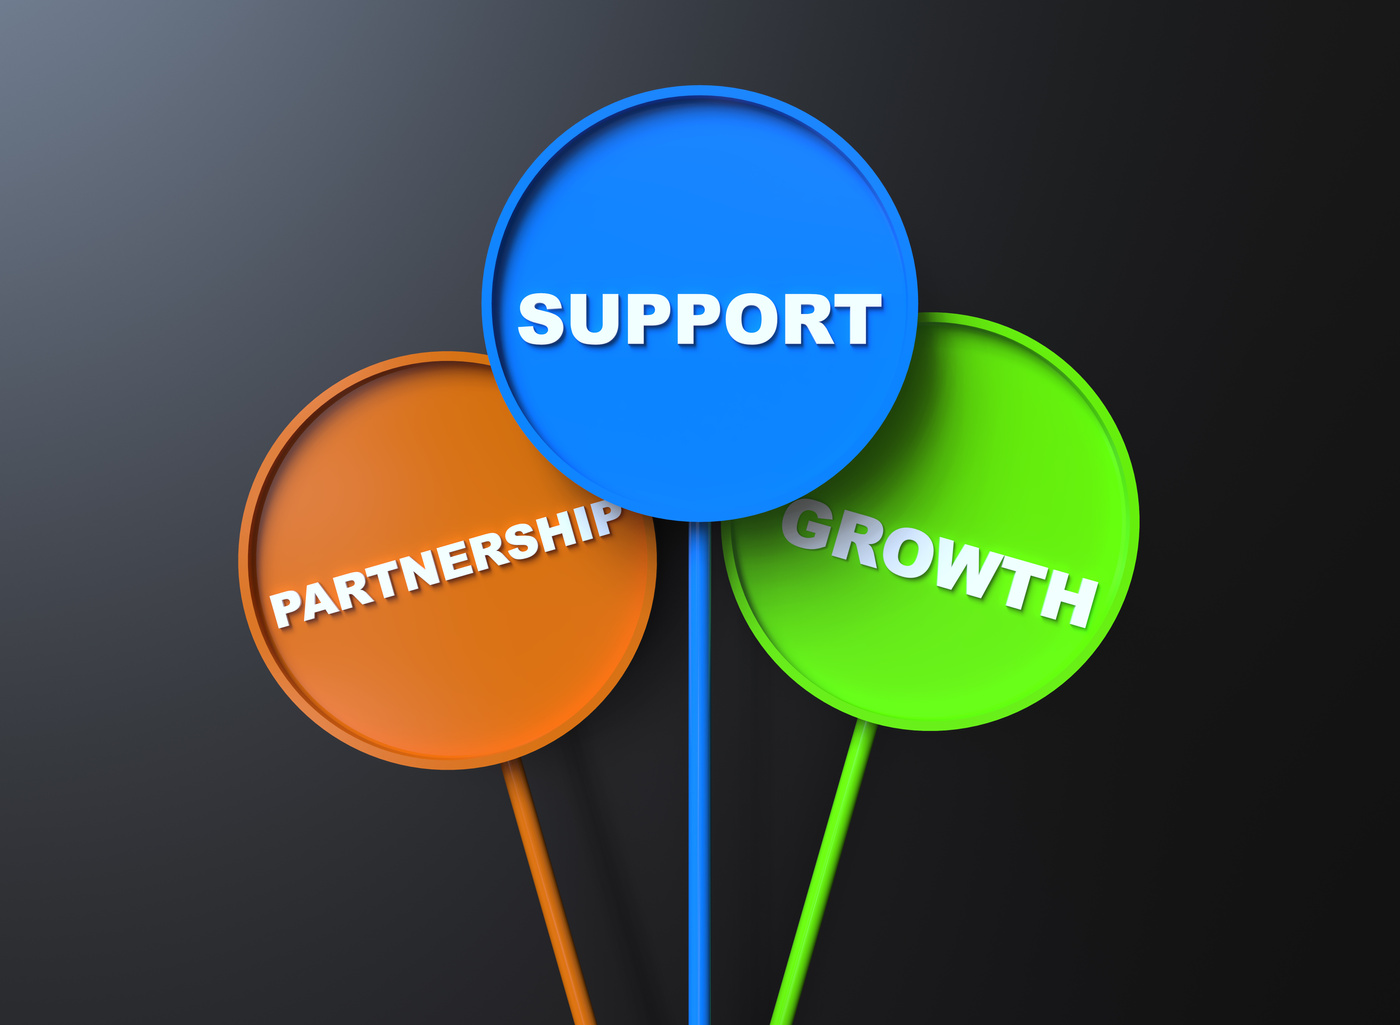 Partnership Support Growth